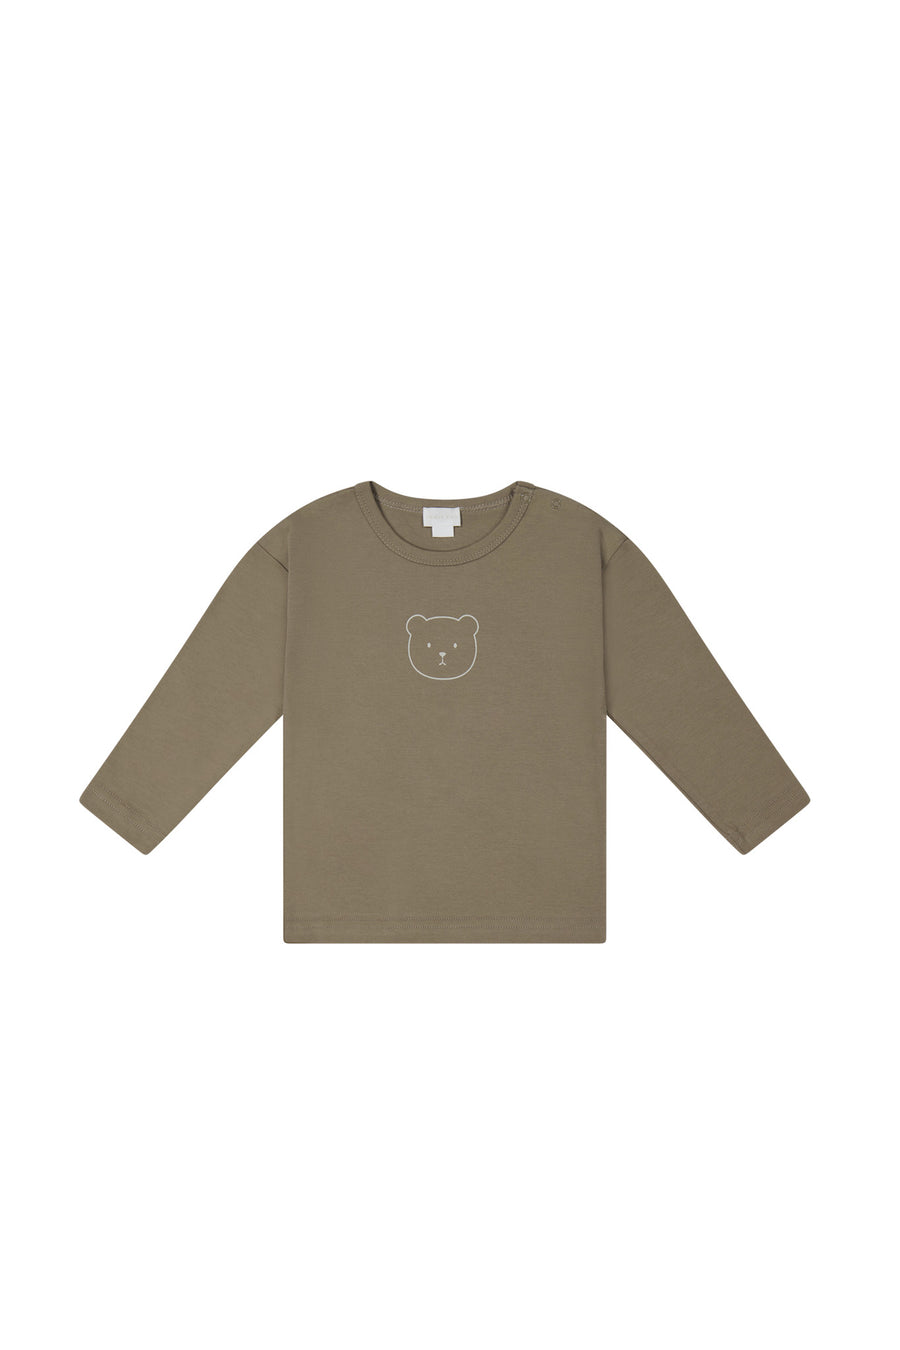 Pima Cotton Arnold Long Sleeve Top - Sepia Childrens Top from Jamie Kay NZ